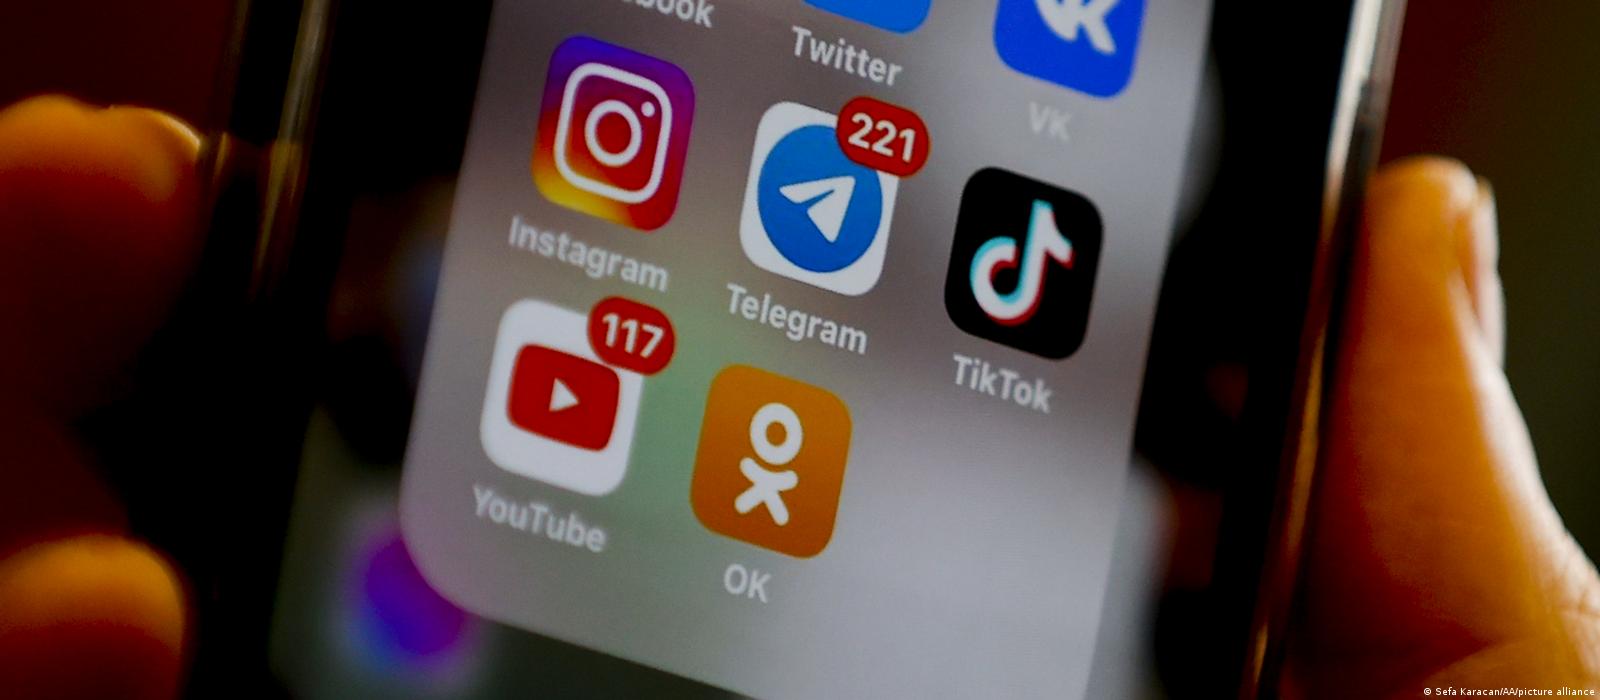 Vk Youngest Porn Ever - Russia bans 'extremist' Facebook and Instagram â€“ DW â€“ 03/21/2022